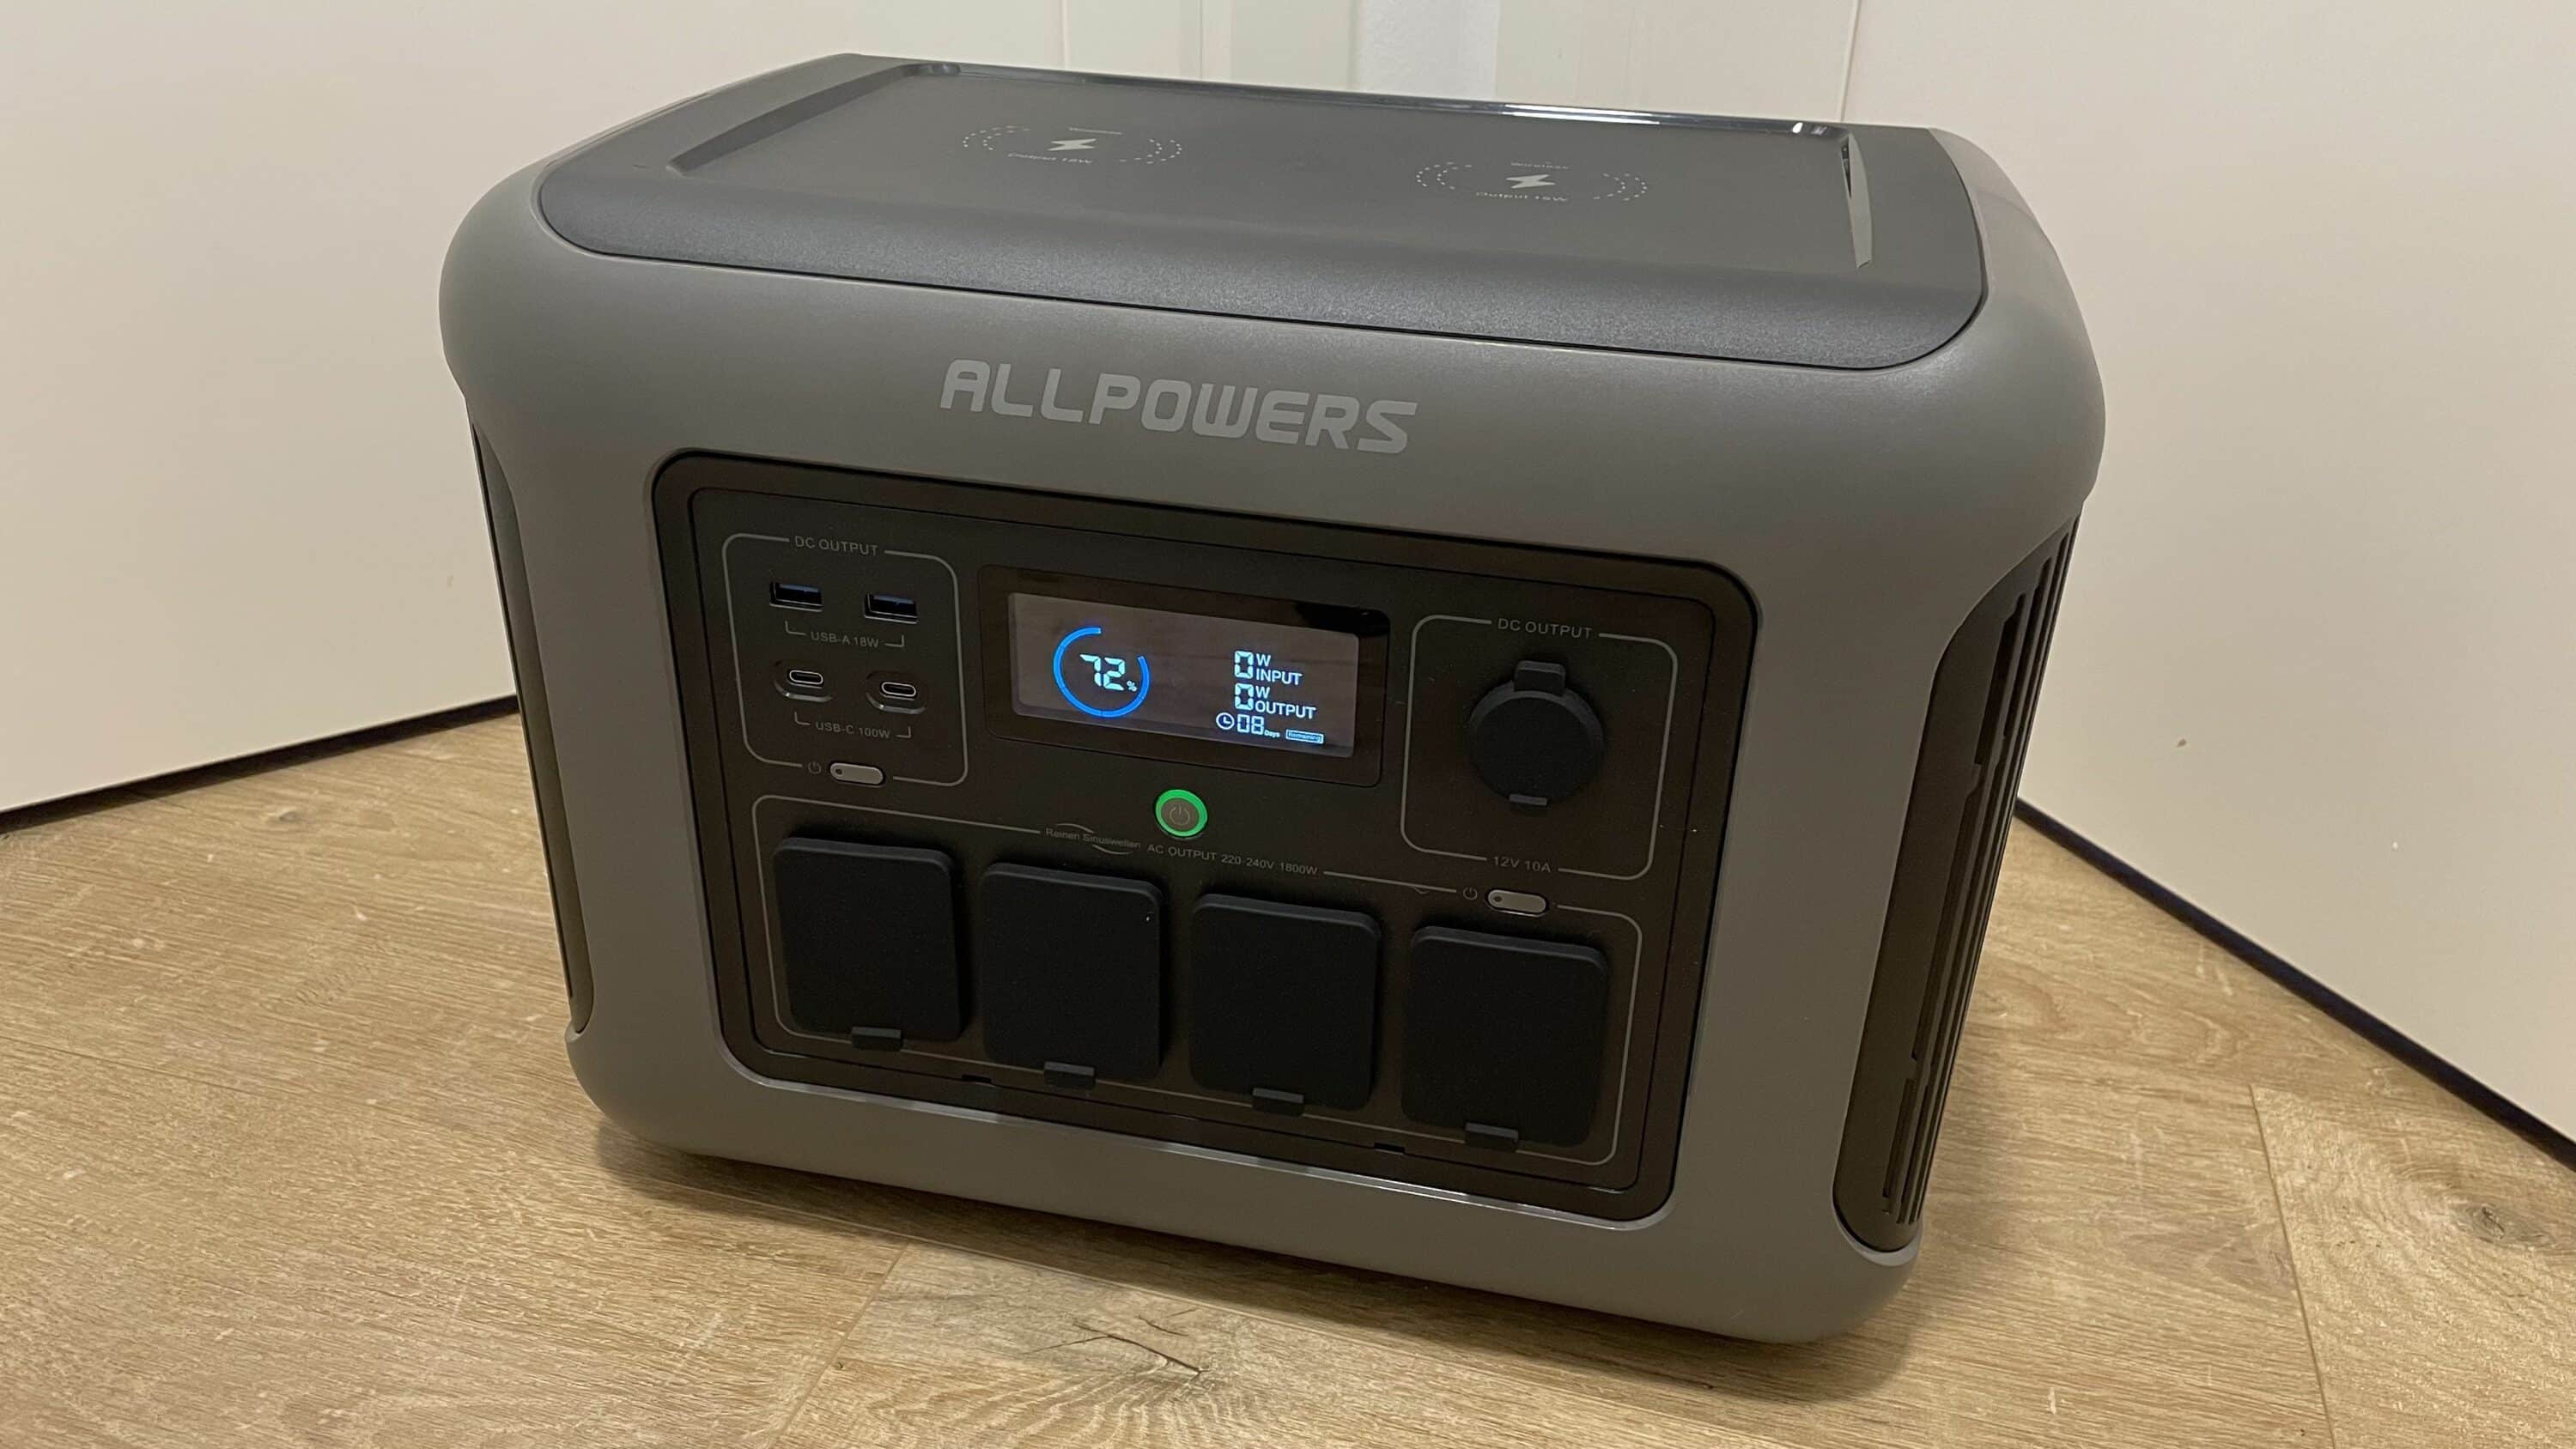 Allpowers R1500 test: lots of power at a low price